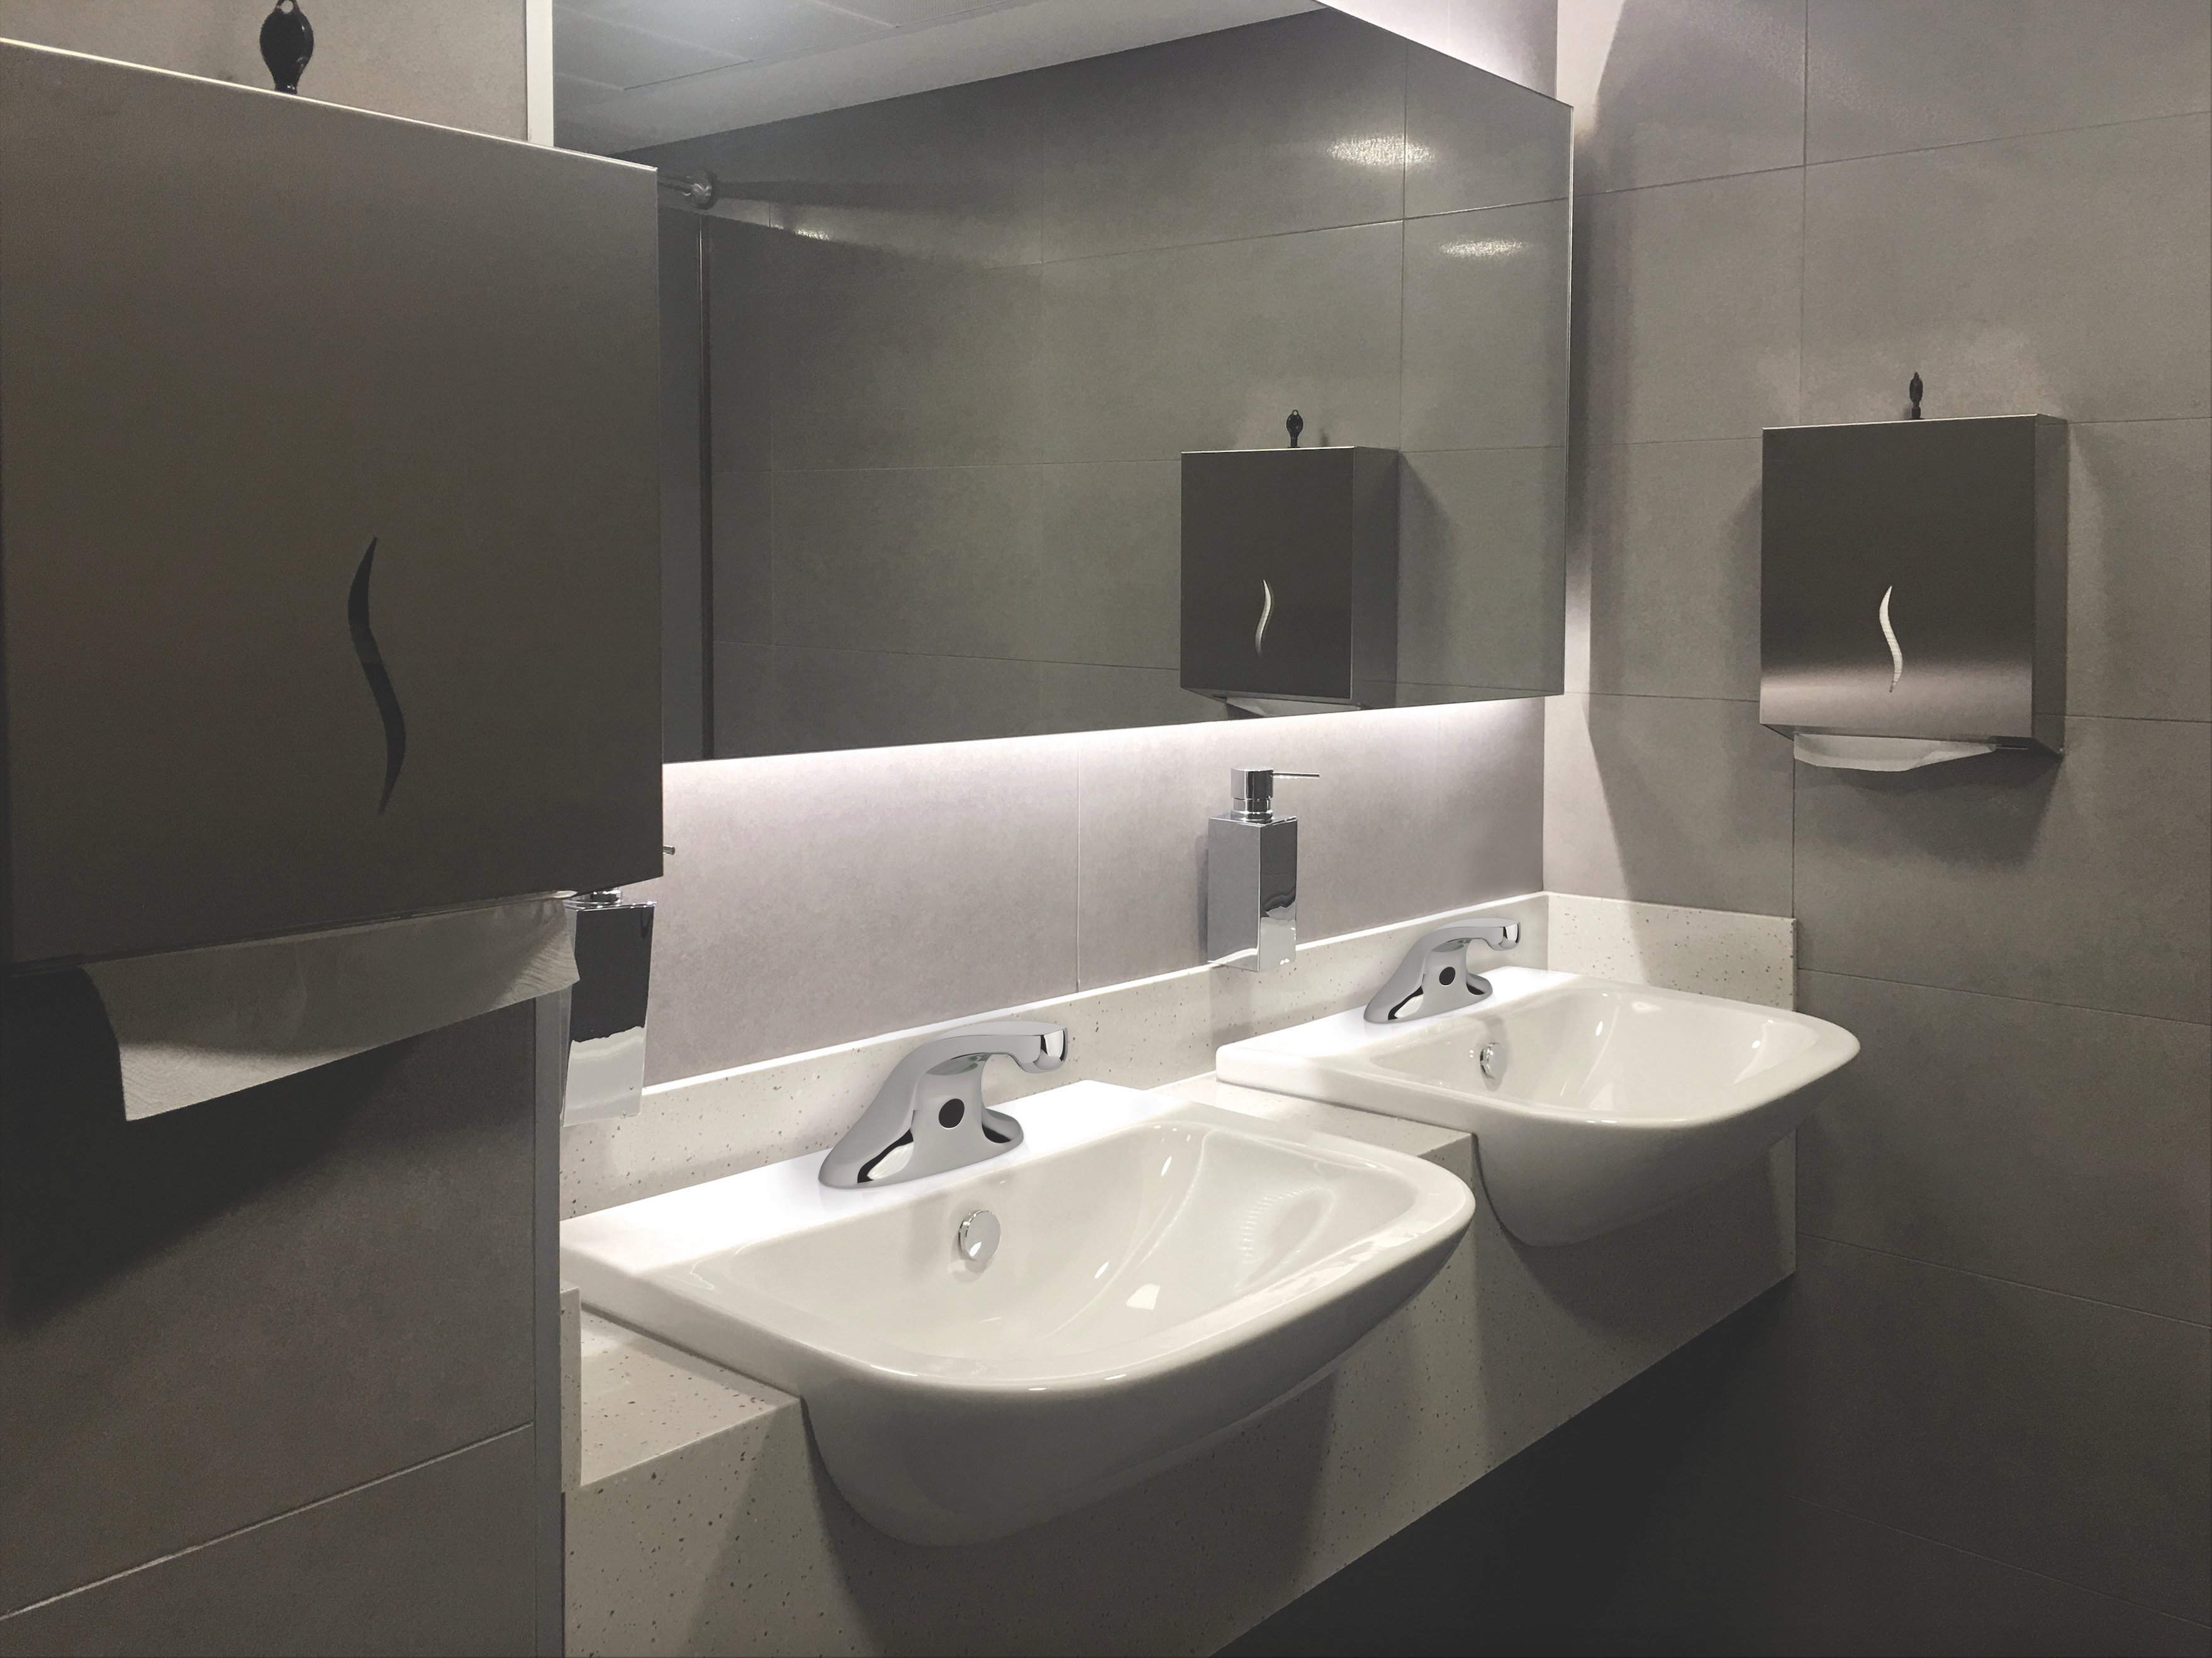 Image of a commercial restroom sinks with touchless faucets installed.